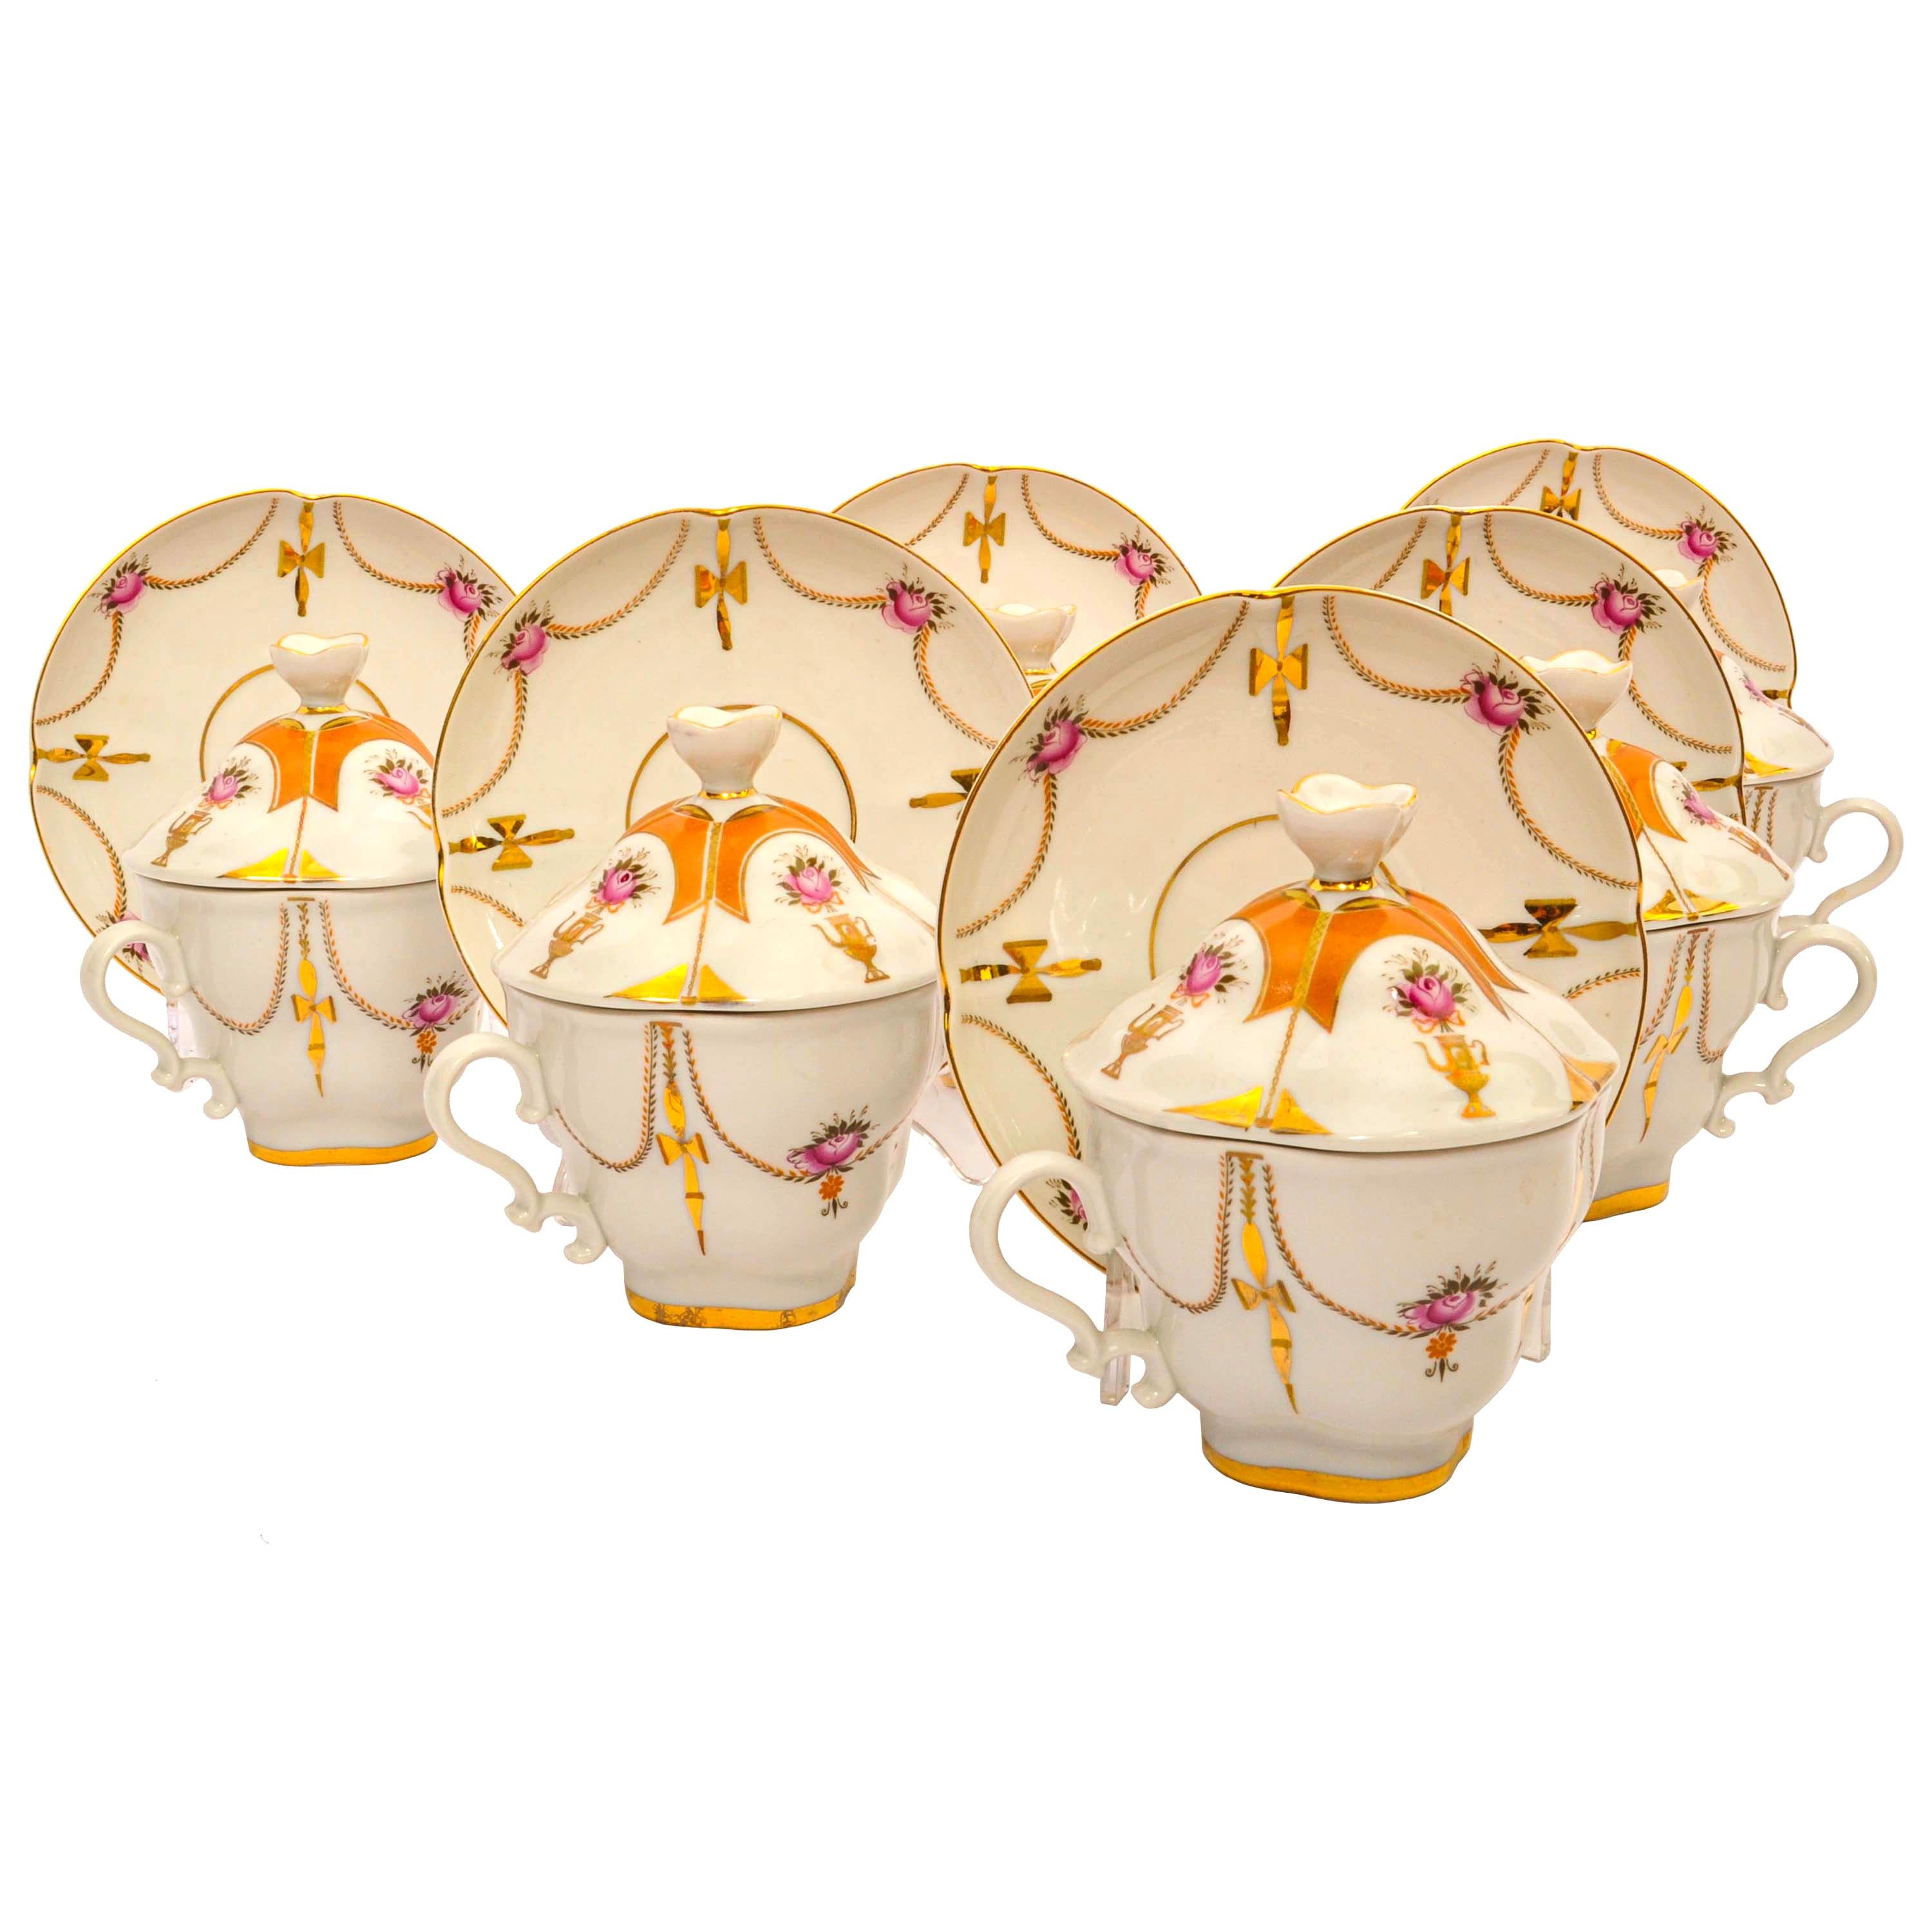 Vintage set of six Imperial Lomonosov Handpainted Gilt Porcelain tea cups & saucers with covers, comprising 18 pieces. 
The set is in perfect condition, each cup and saucer is hand decorated with swags and garlands and samovars, with yellow, orange